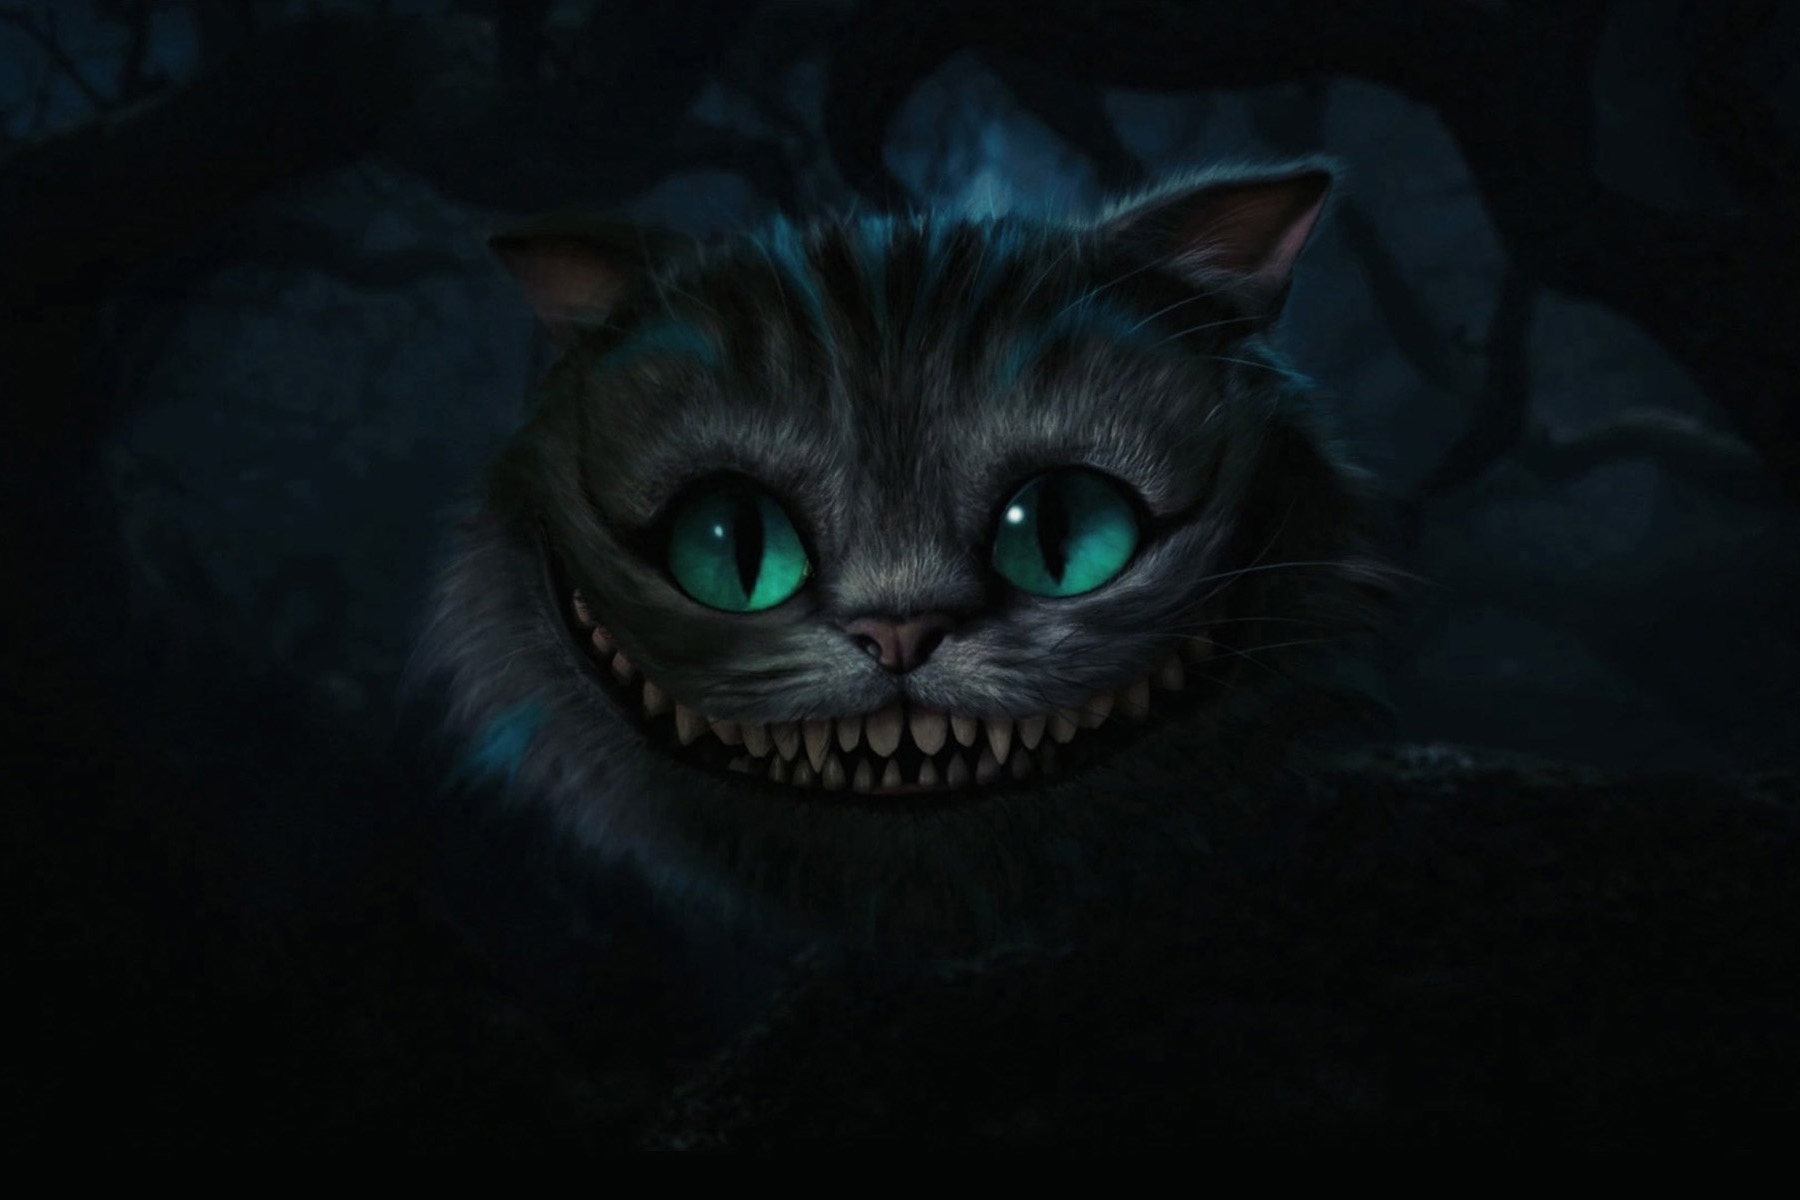 Download Wallpaper, Download movies cats alice in wonderland scary smiling cheshire cat 1800x1200 wallpaper People HD Wallpaper, Hi Res People Wallpaper, High Definition Wallpaper